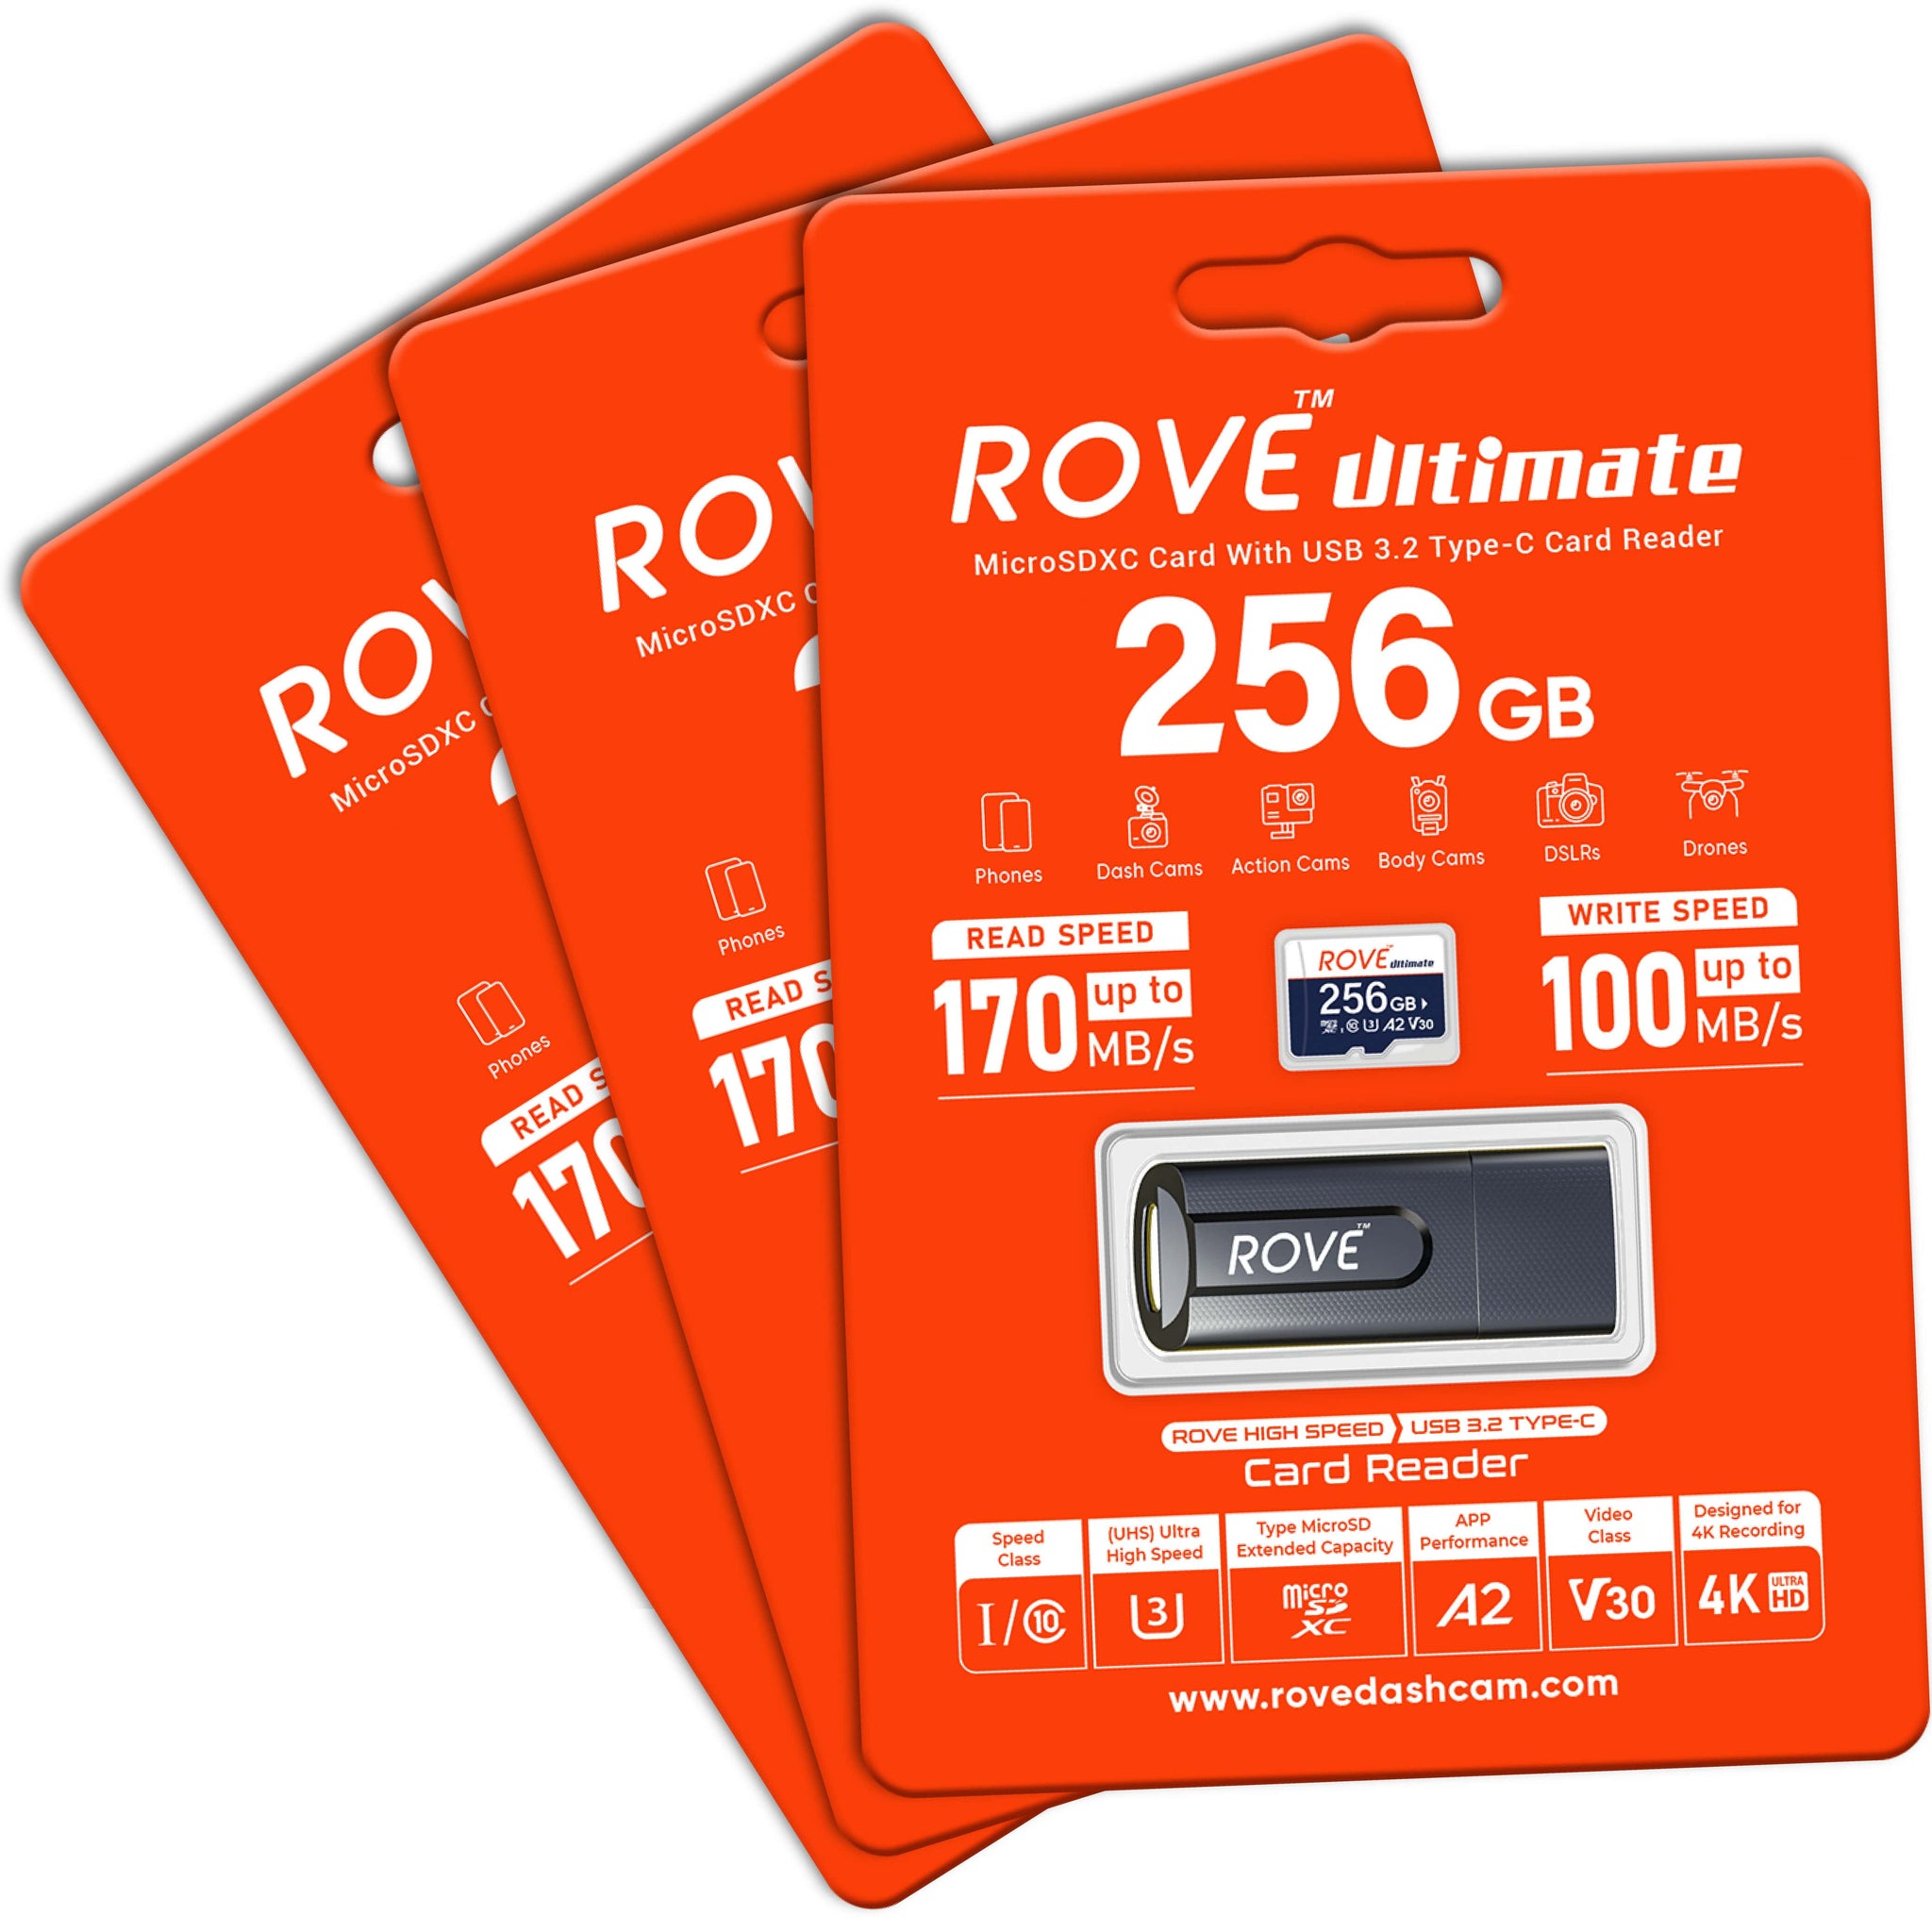 3 Rove Ultimate 256GB Micro SDXC Card with USB 3.2 Gen-1 Type-C card reader, Micro SD memory card for dash cam, Up to 170MB/s Read, 100MB/s Write, U3, Class10